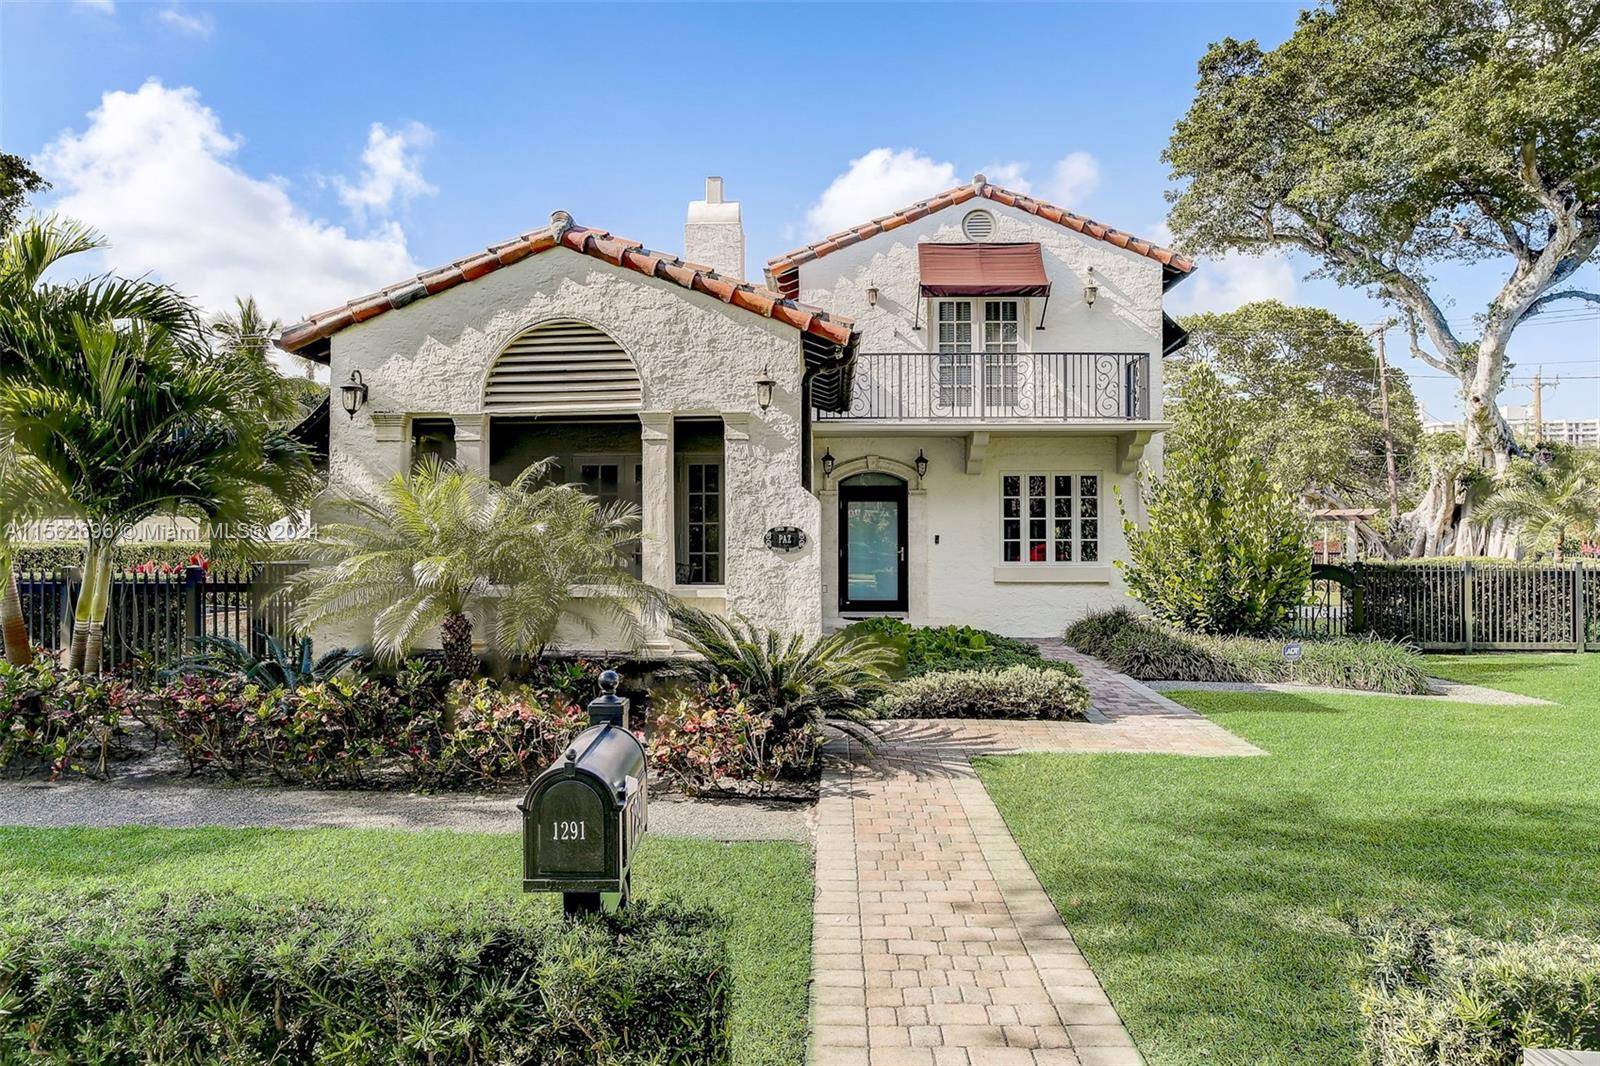 Step into a tastefully upgraded and redesigned Mediterranean Revival single family two story 1926 built residence, the epitome of class, comfort, and charm.